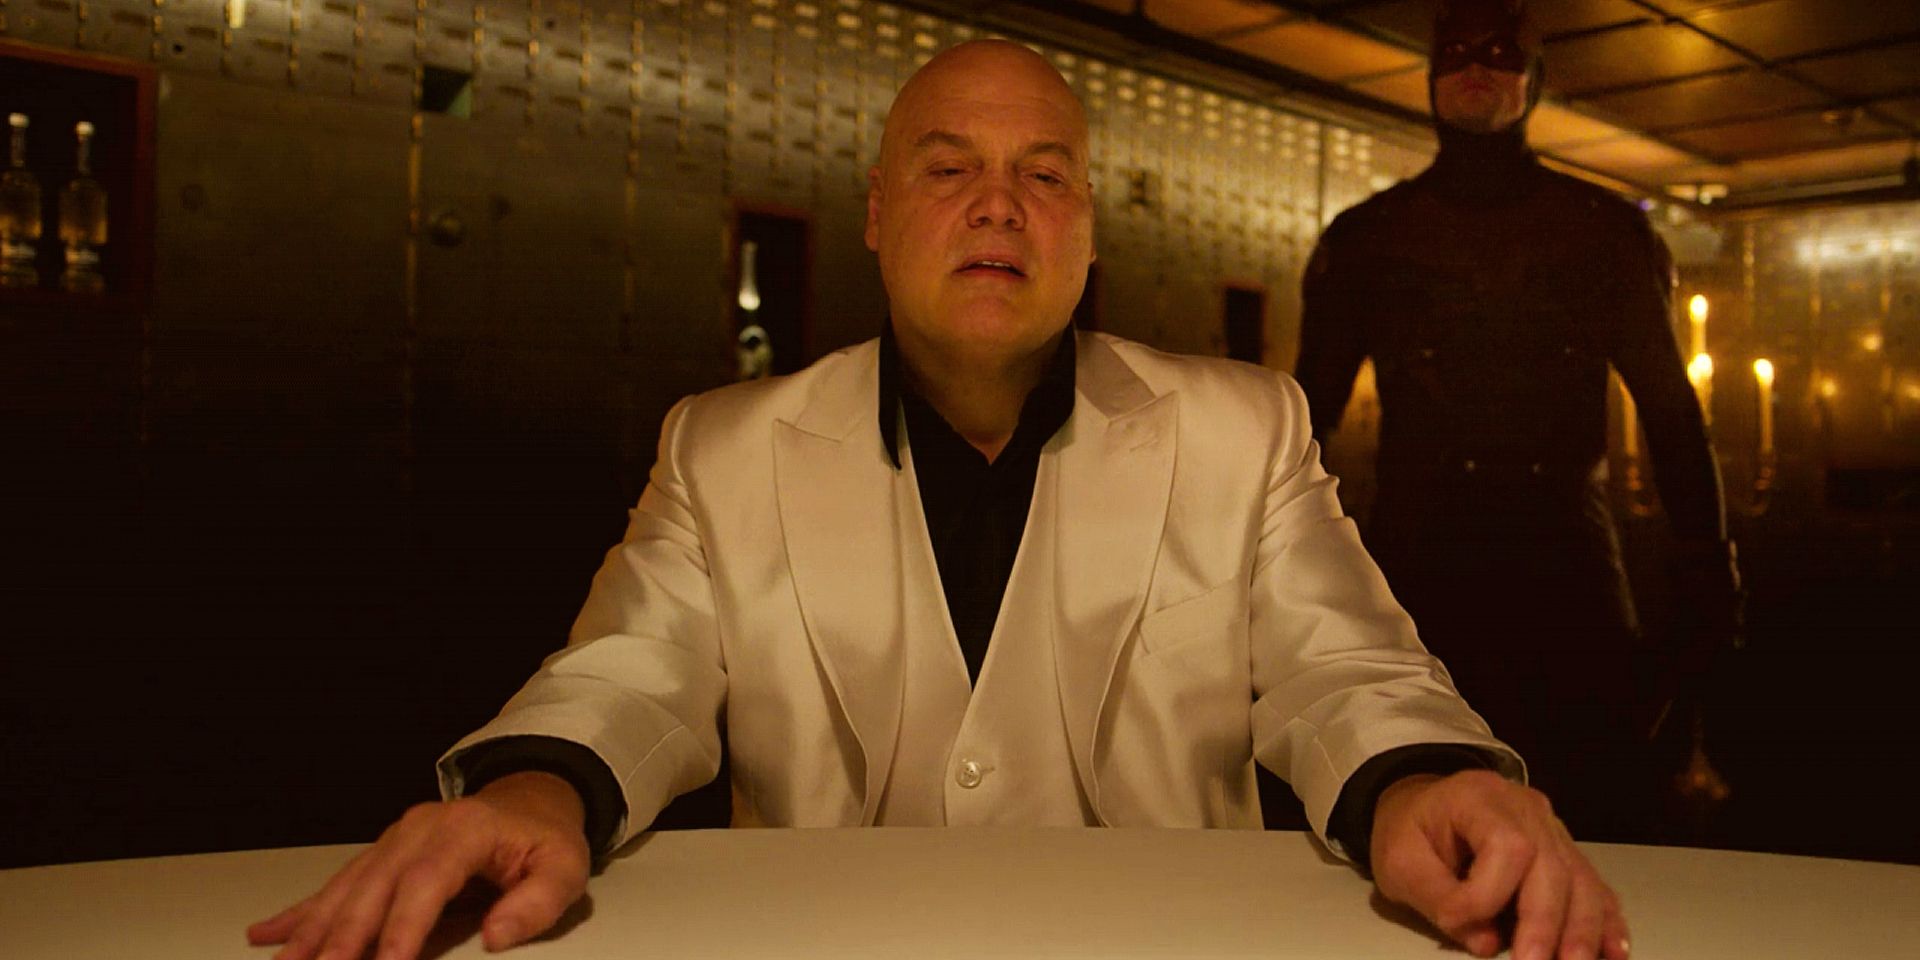 Vincent D’Onofrio in character as Kingpin, seated at a table with his hands outstretched and a snarl on his face